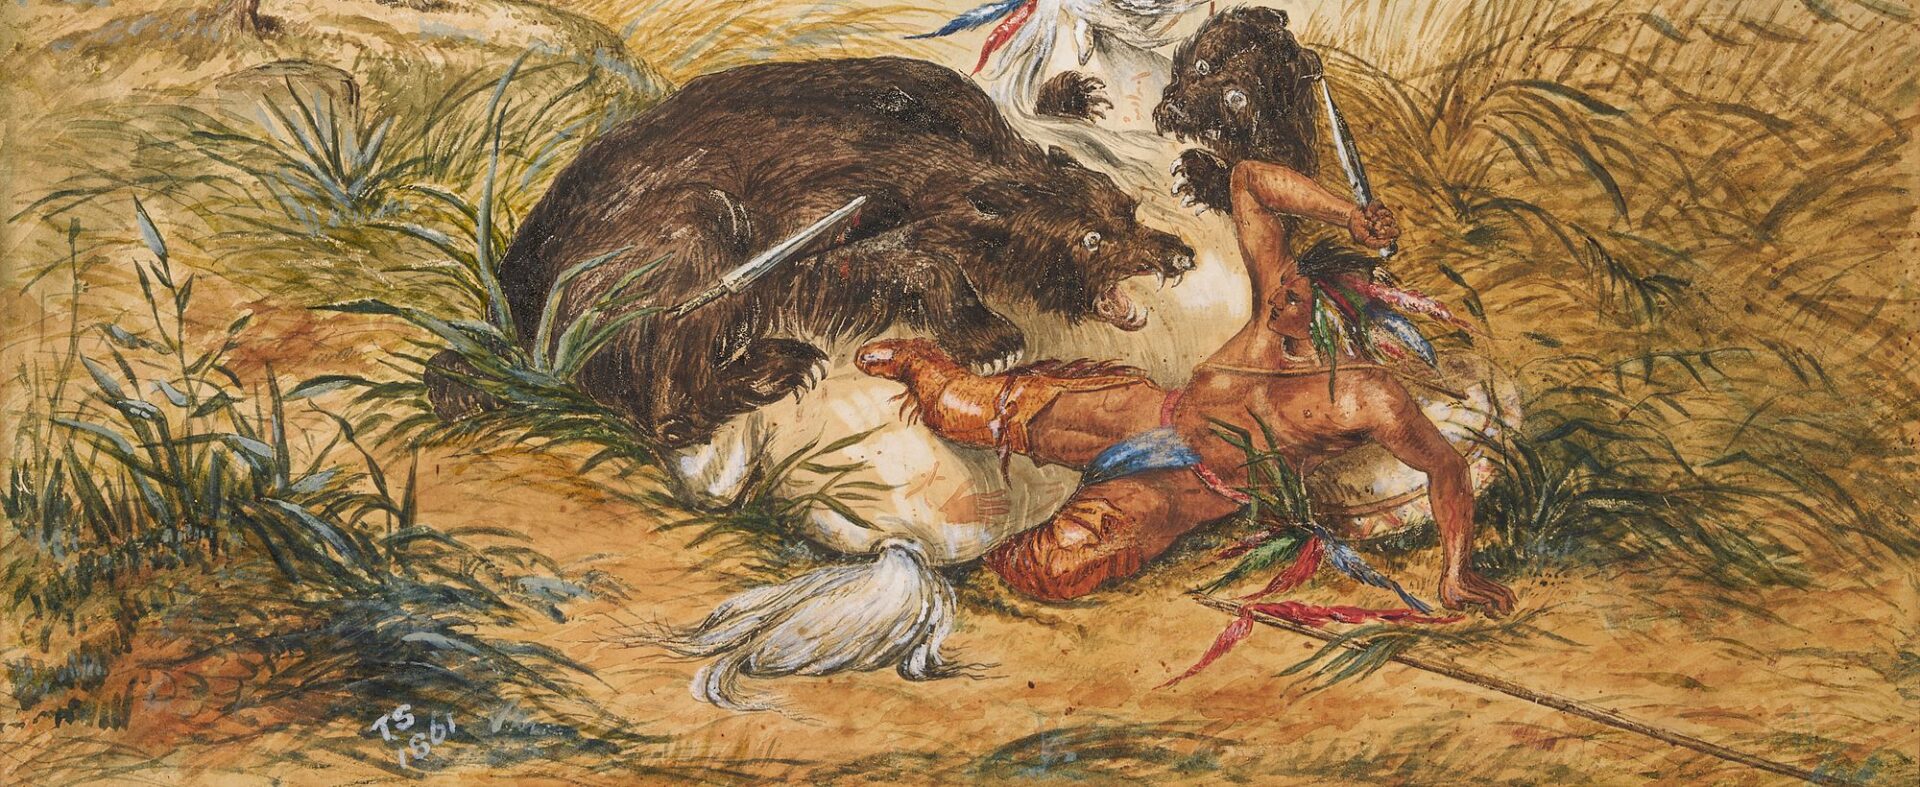 Lot 473: Pawnee Attacked by Bear, Watercolor & Print